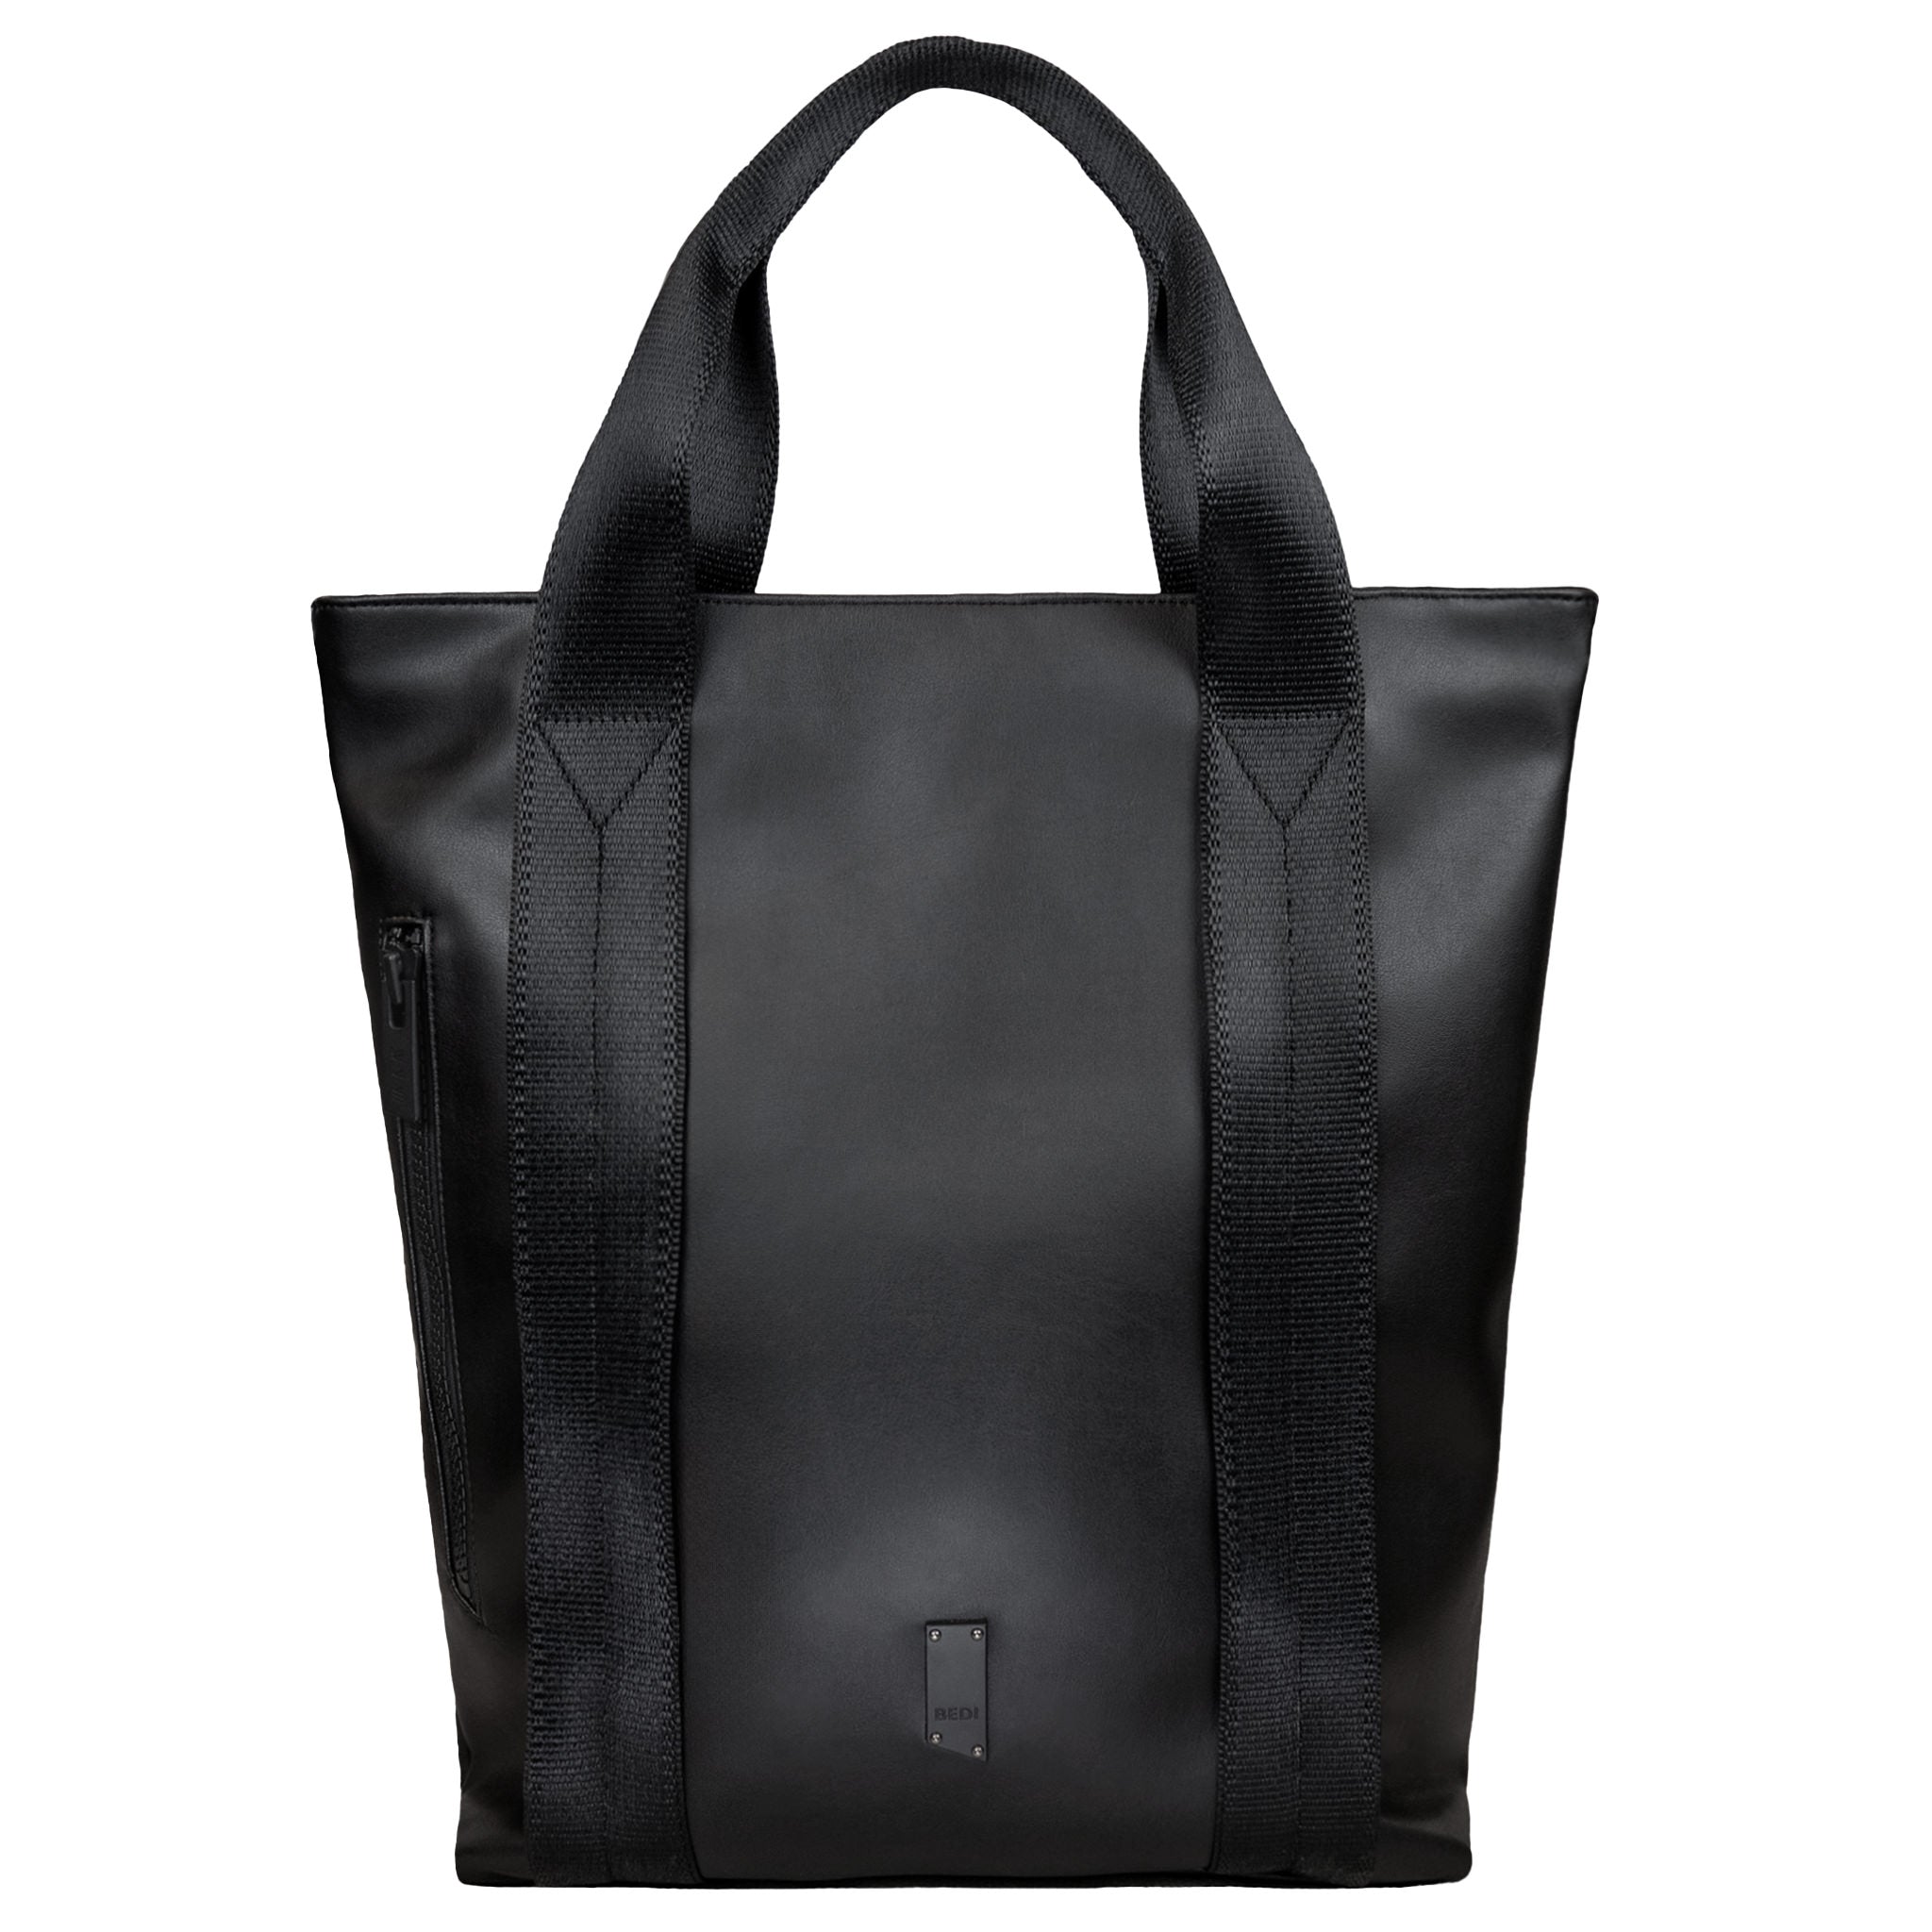 Front view of a totepack, with a vertical front zipper pocket, and a strap made of black seatbelts. The material is a black vegan leather